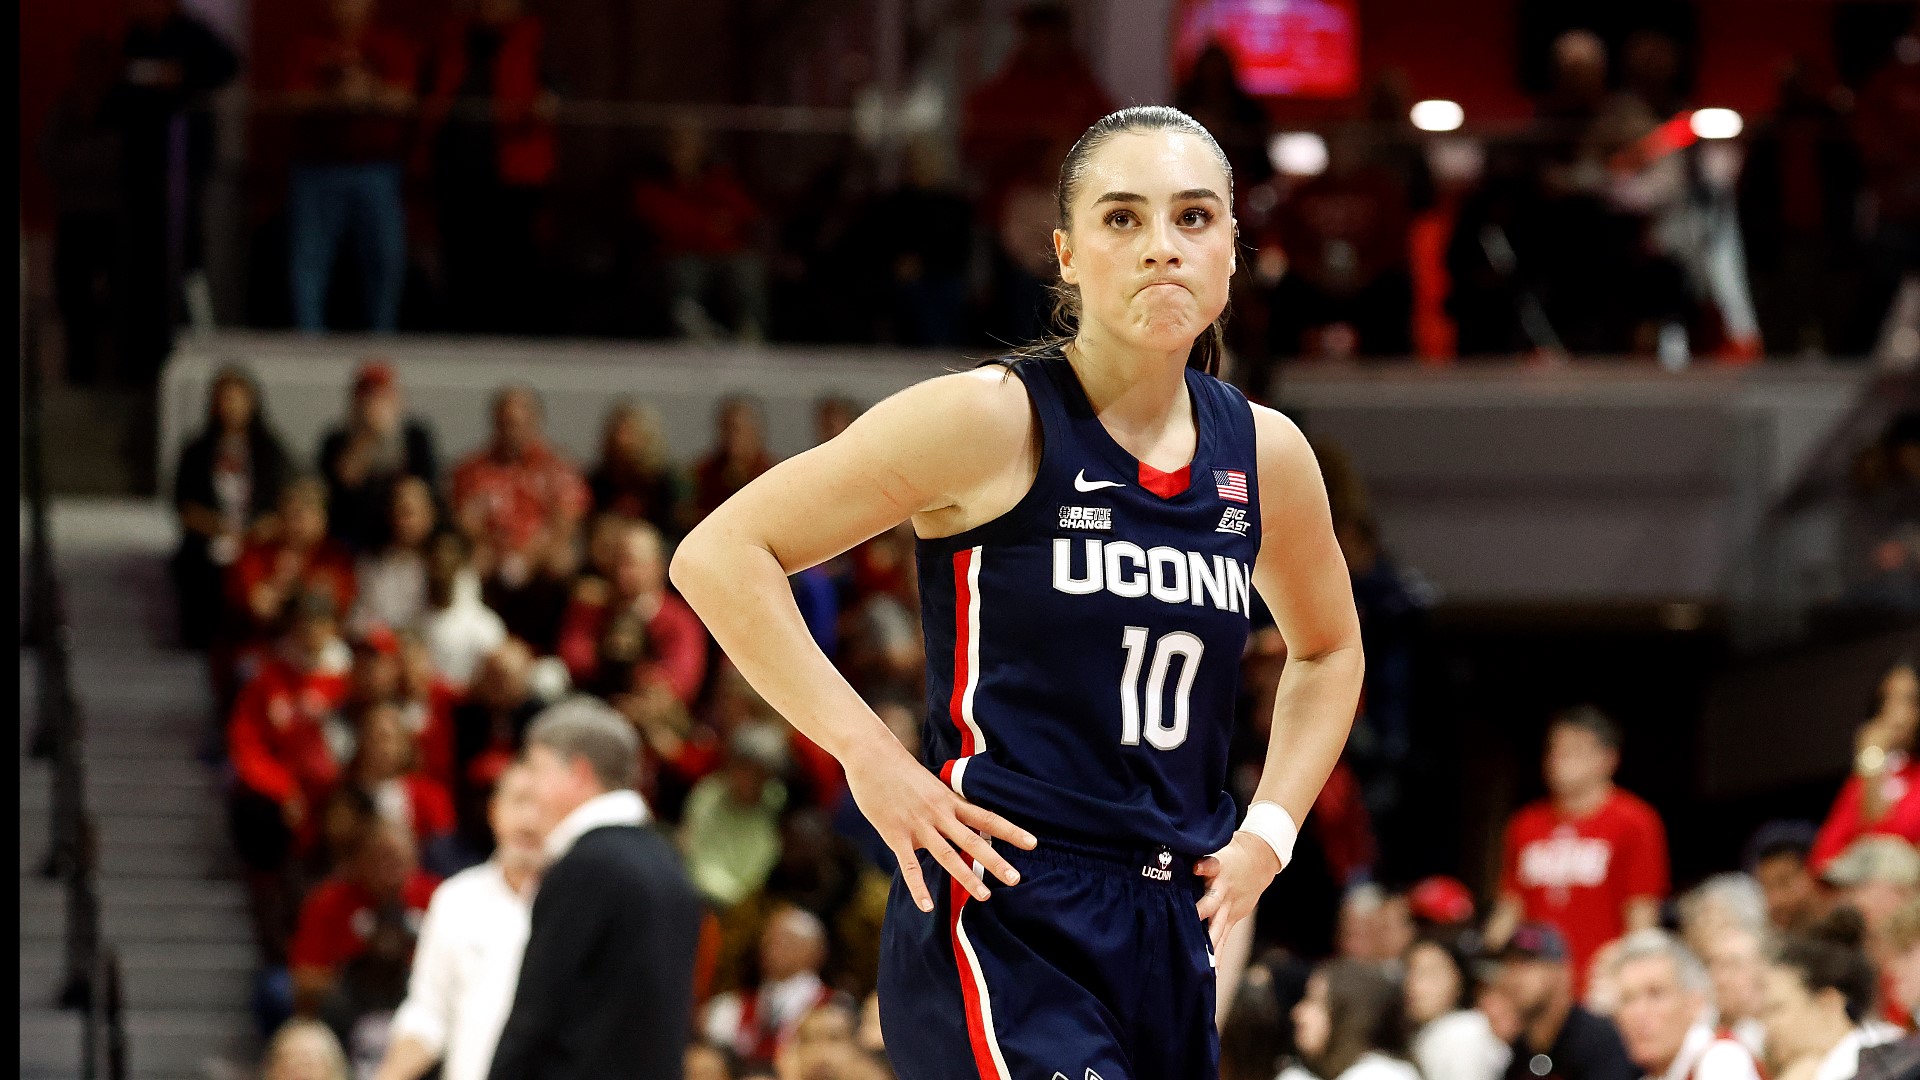 Star UConn point guard Nika Muhl announces on social media her decision to leave UConn after this season.